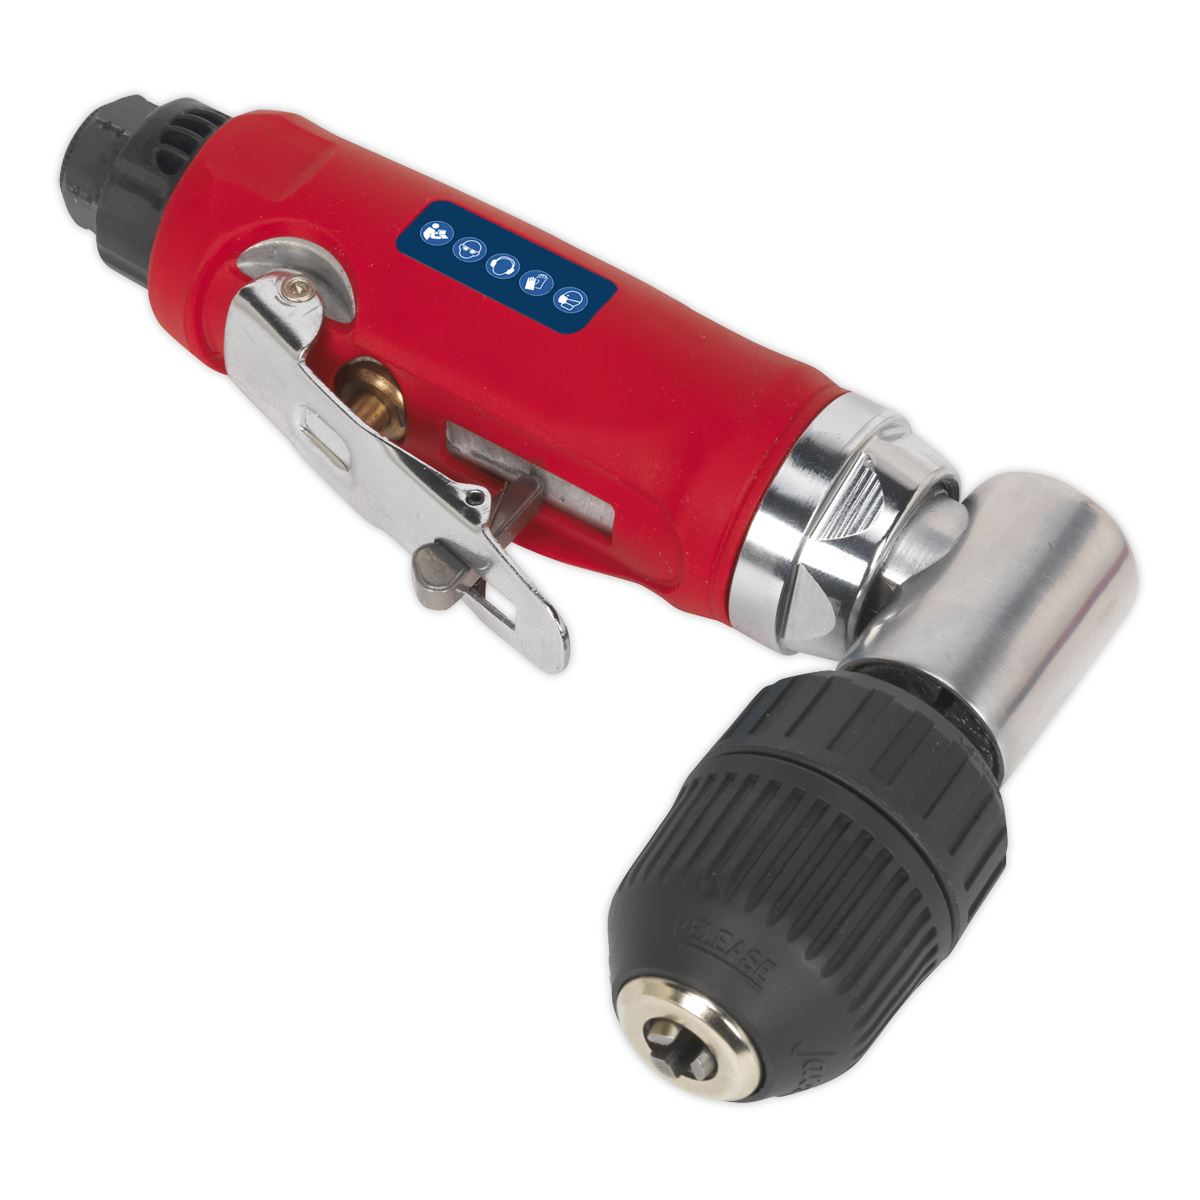 Generation Air Angle Drill with Ø10mm Keyless Chuck